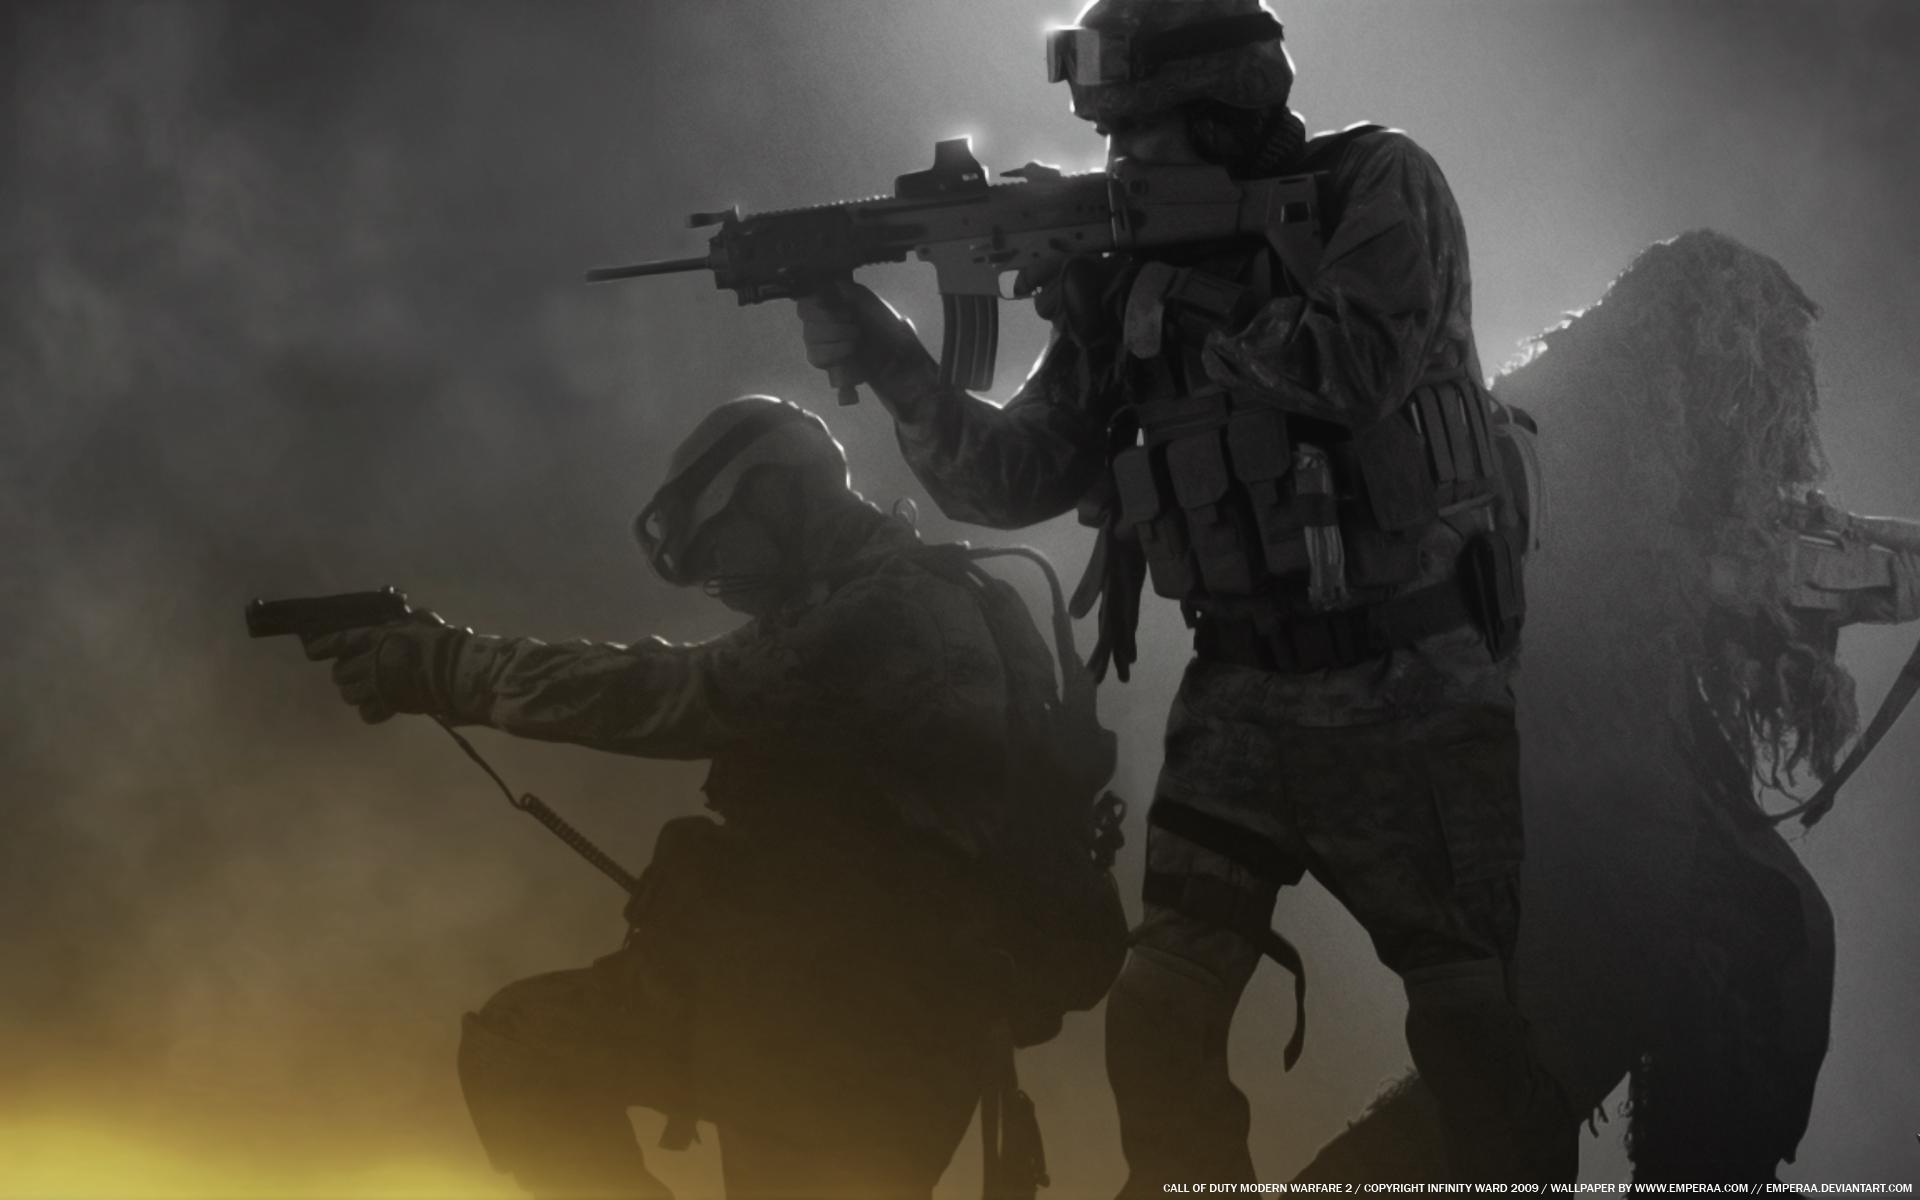 Special Forces in the fog wallpaper and image